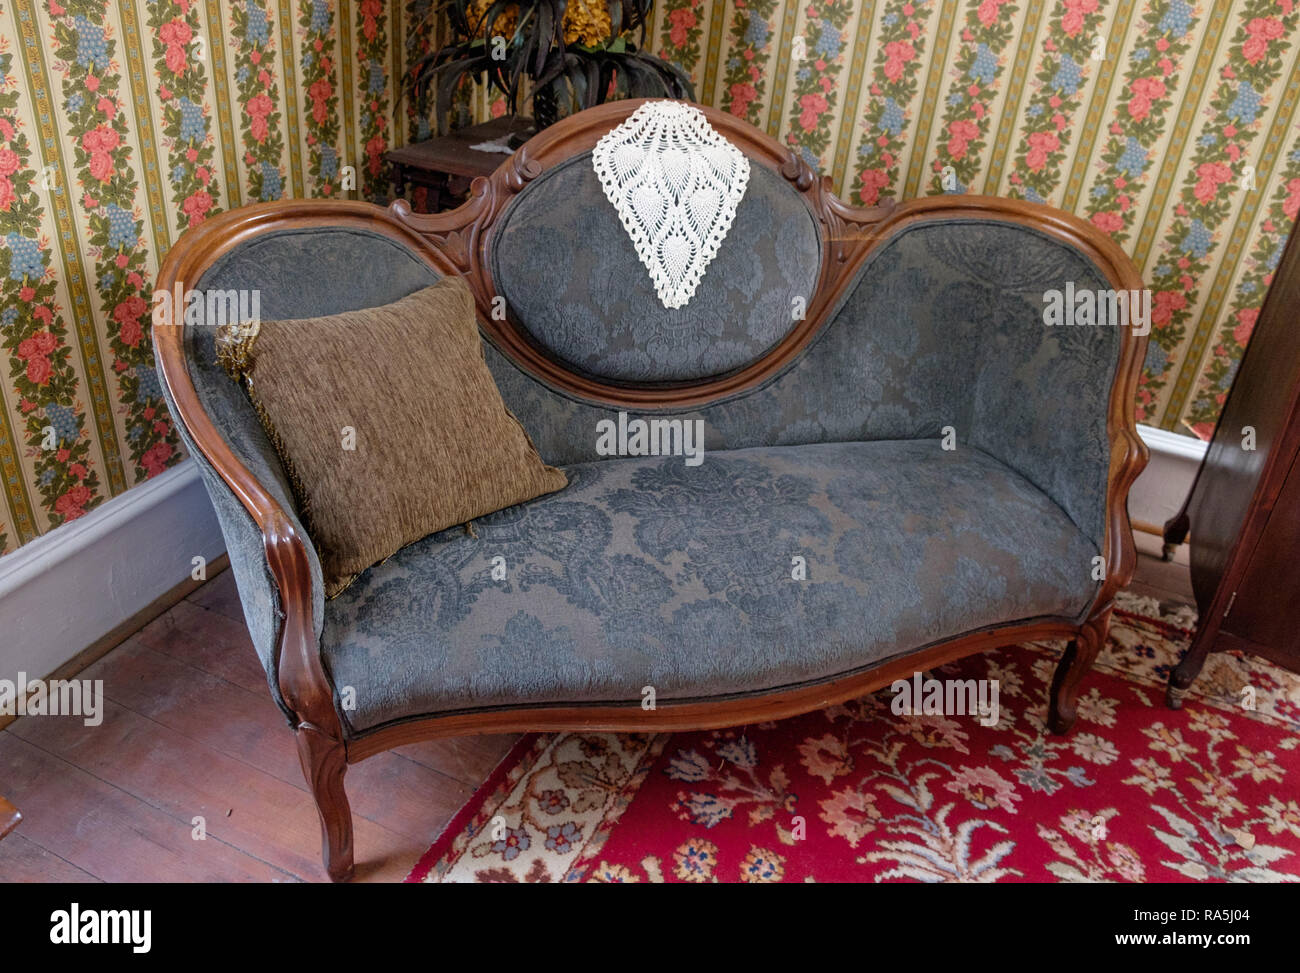 Antique couch with doily, throw pillow, pink & blue vintage floral wall paper & vintage rug. Interior of old home, Chestnut Square, McKinney Texas. Stock Photo